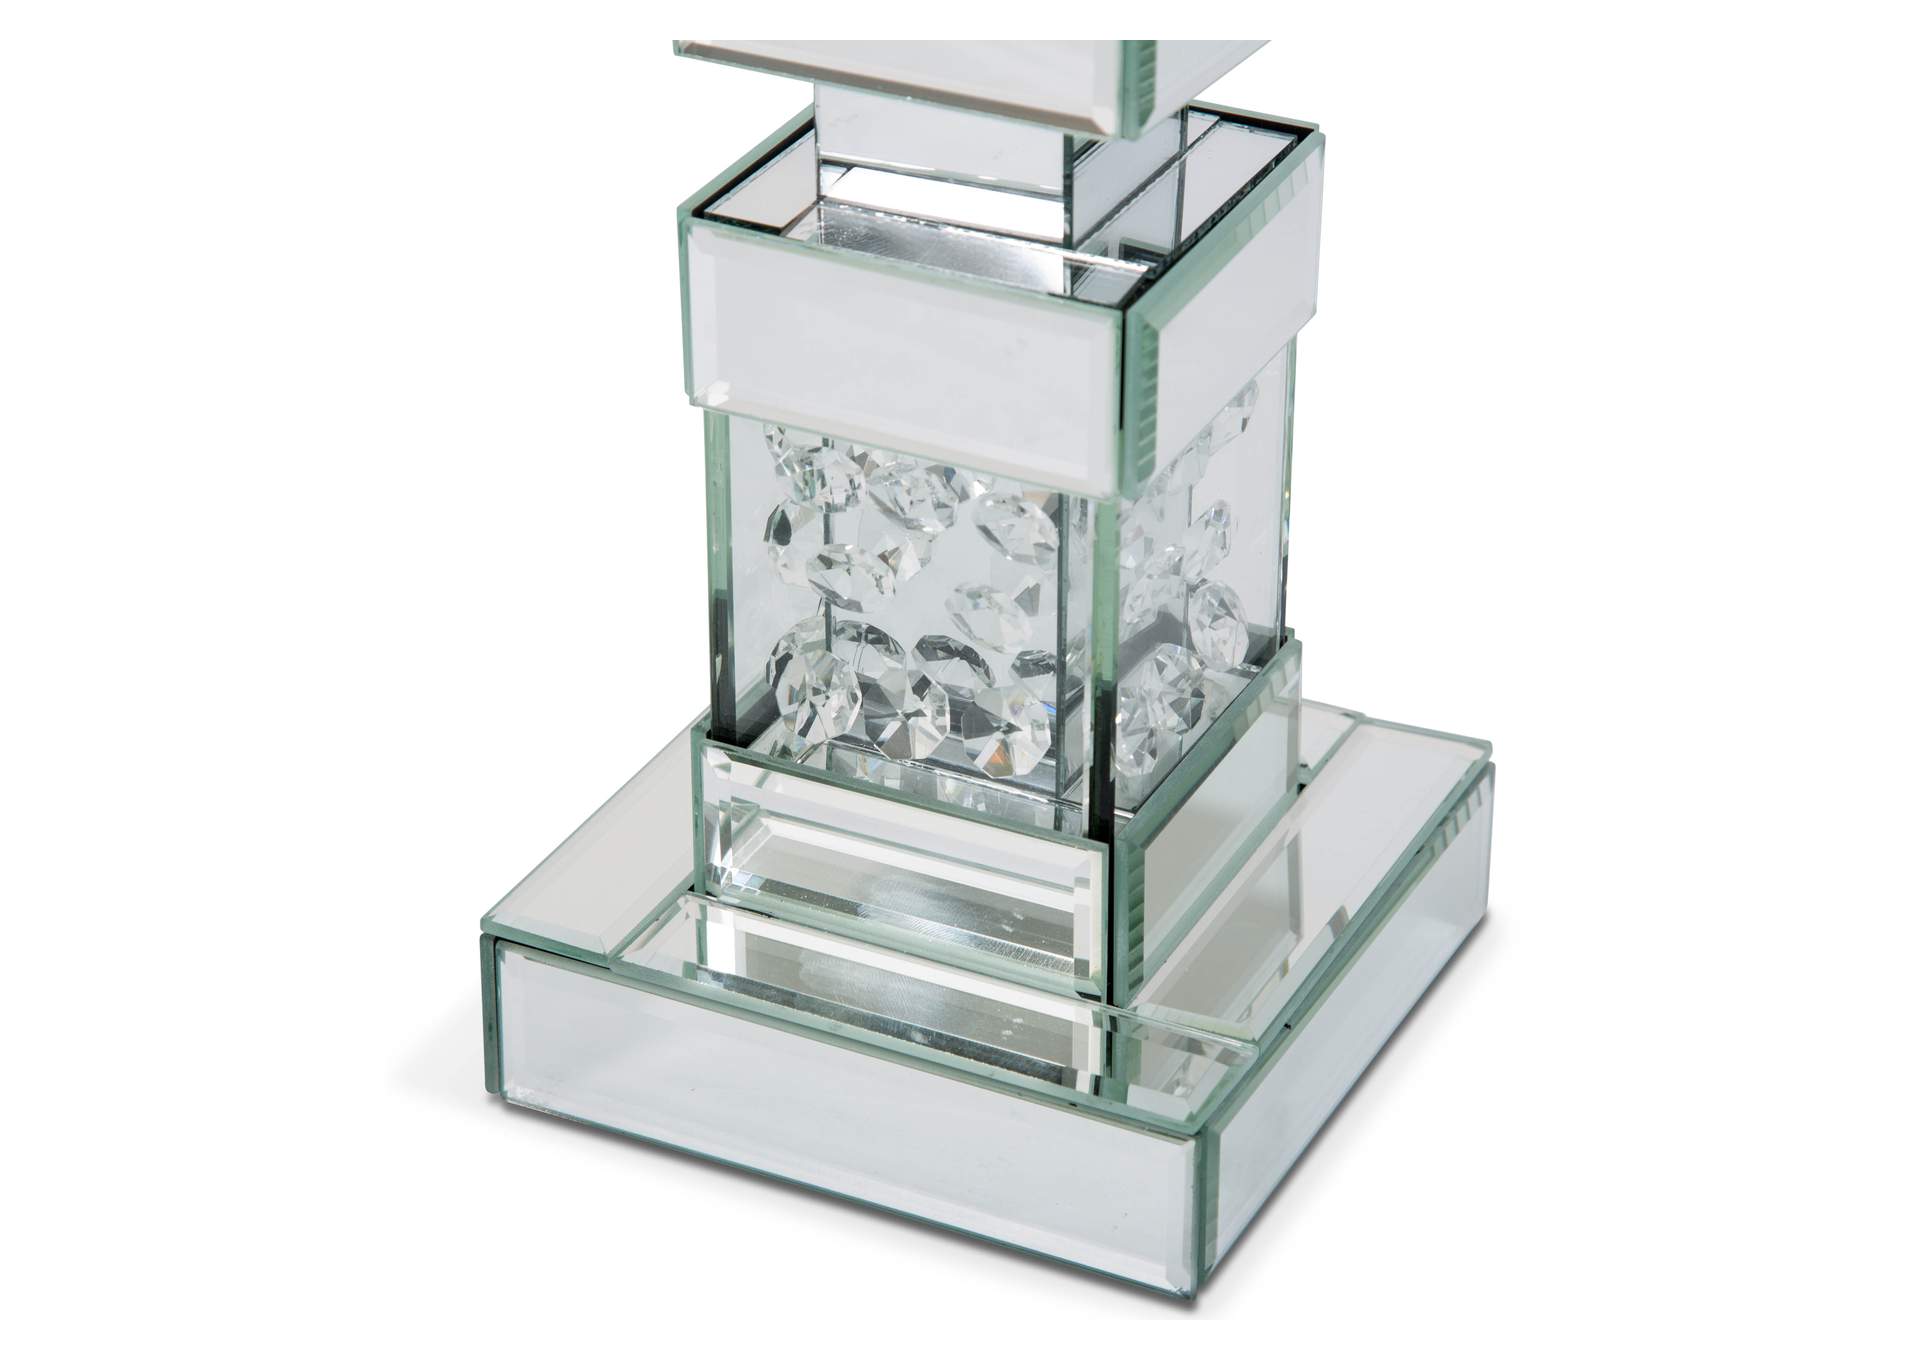 Montreal Mirrored/Crystal Candle Holder,Short,-Pack/2,Michael Amini (AICO)